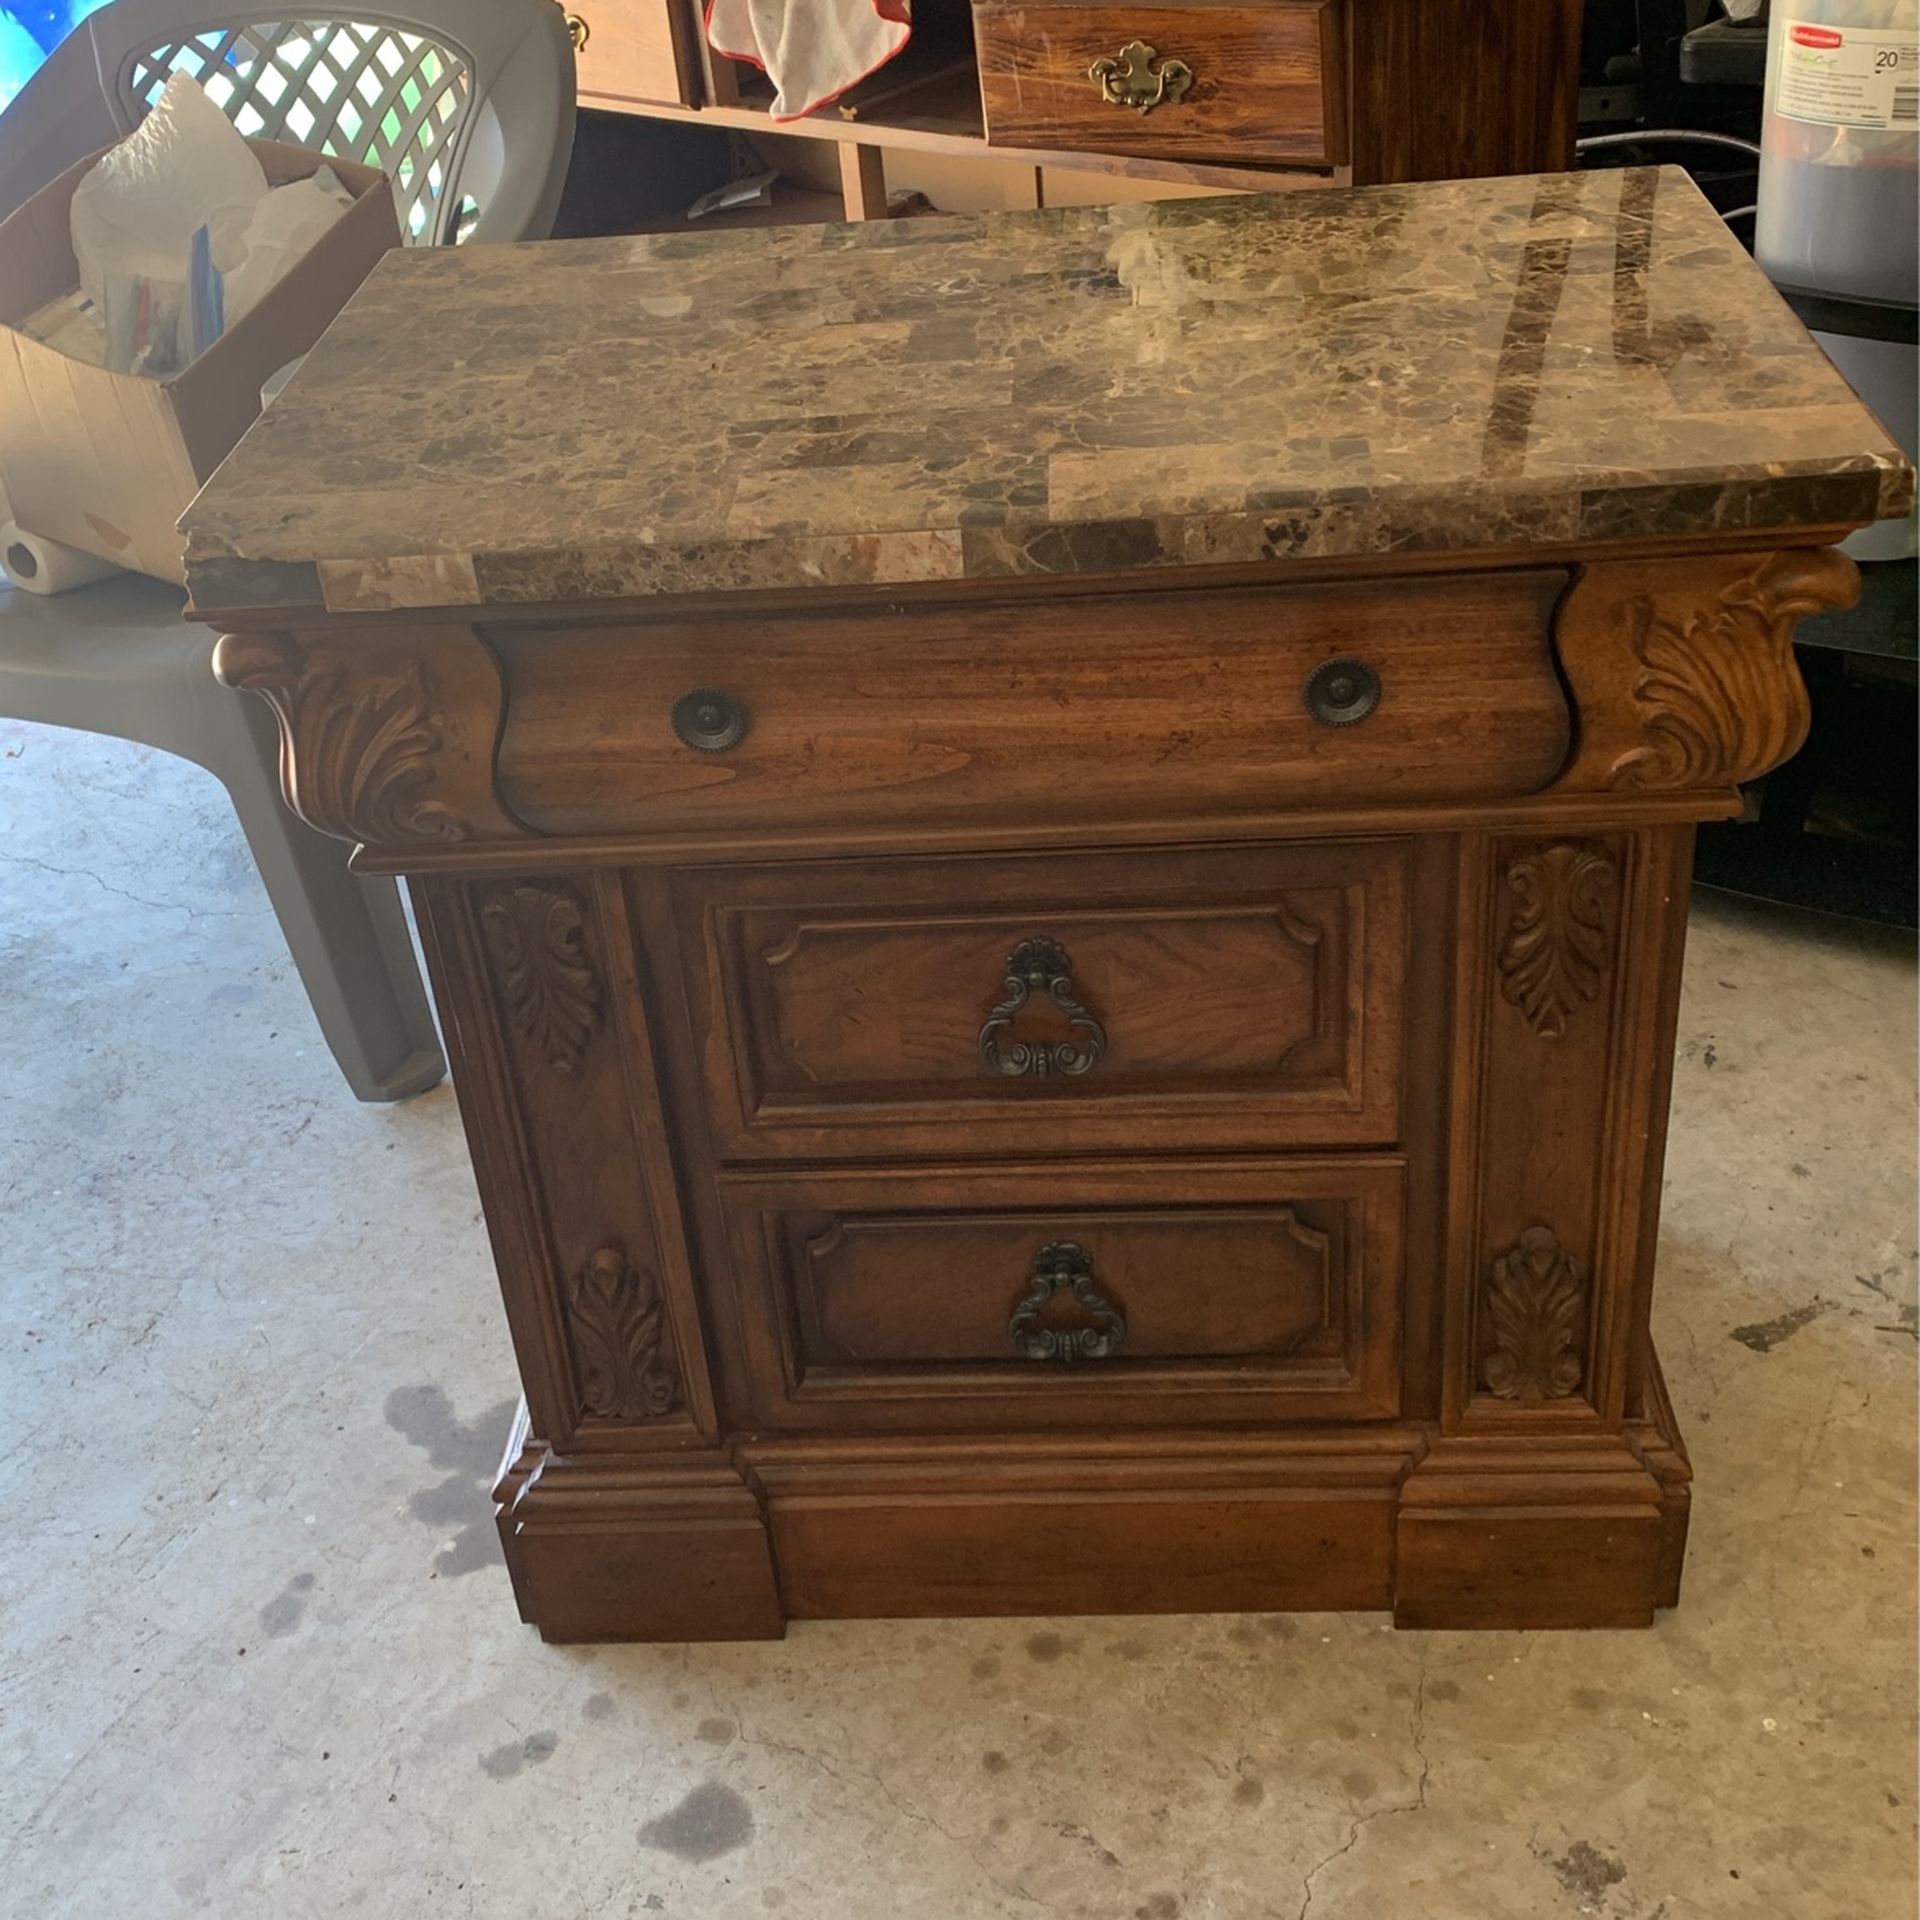 Beautiful Piece of Furniture. Solid Marble top. One Corner Is Broken But Have The Pieces To Glue Back In